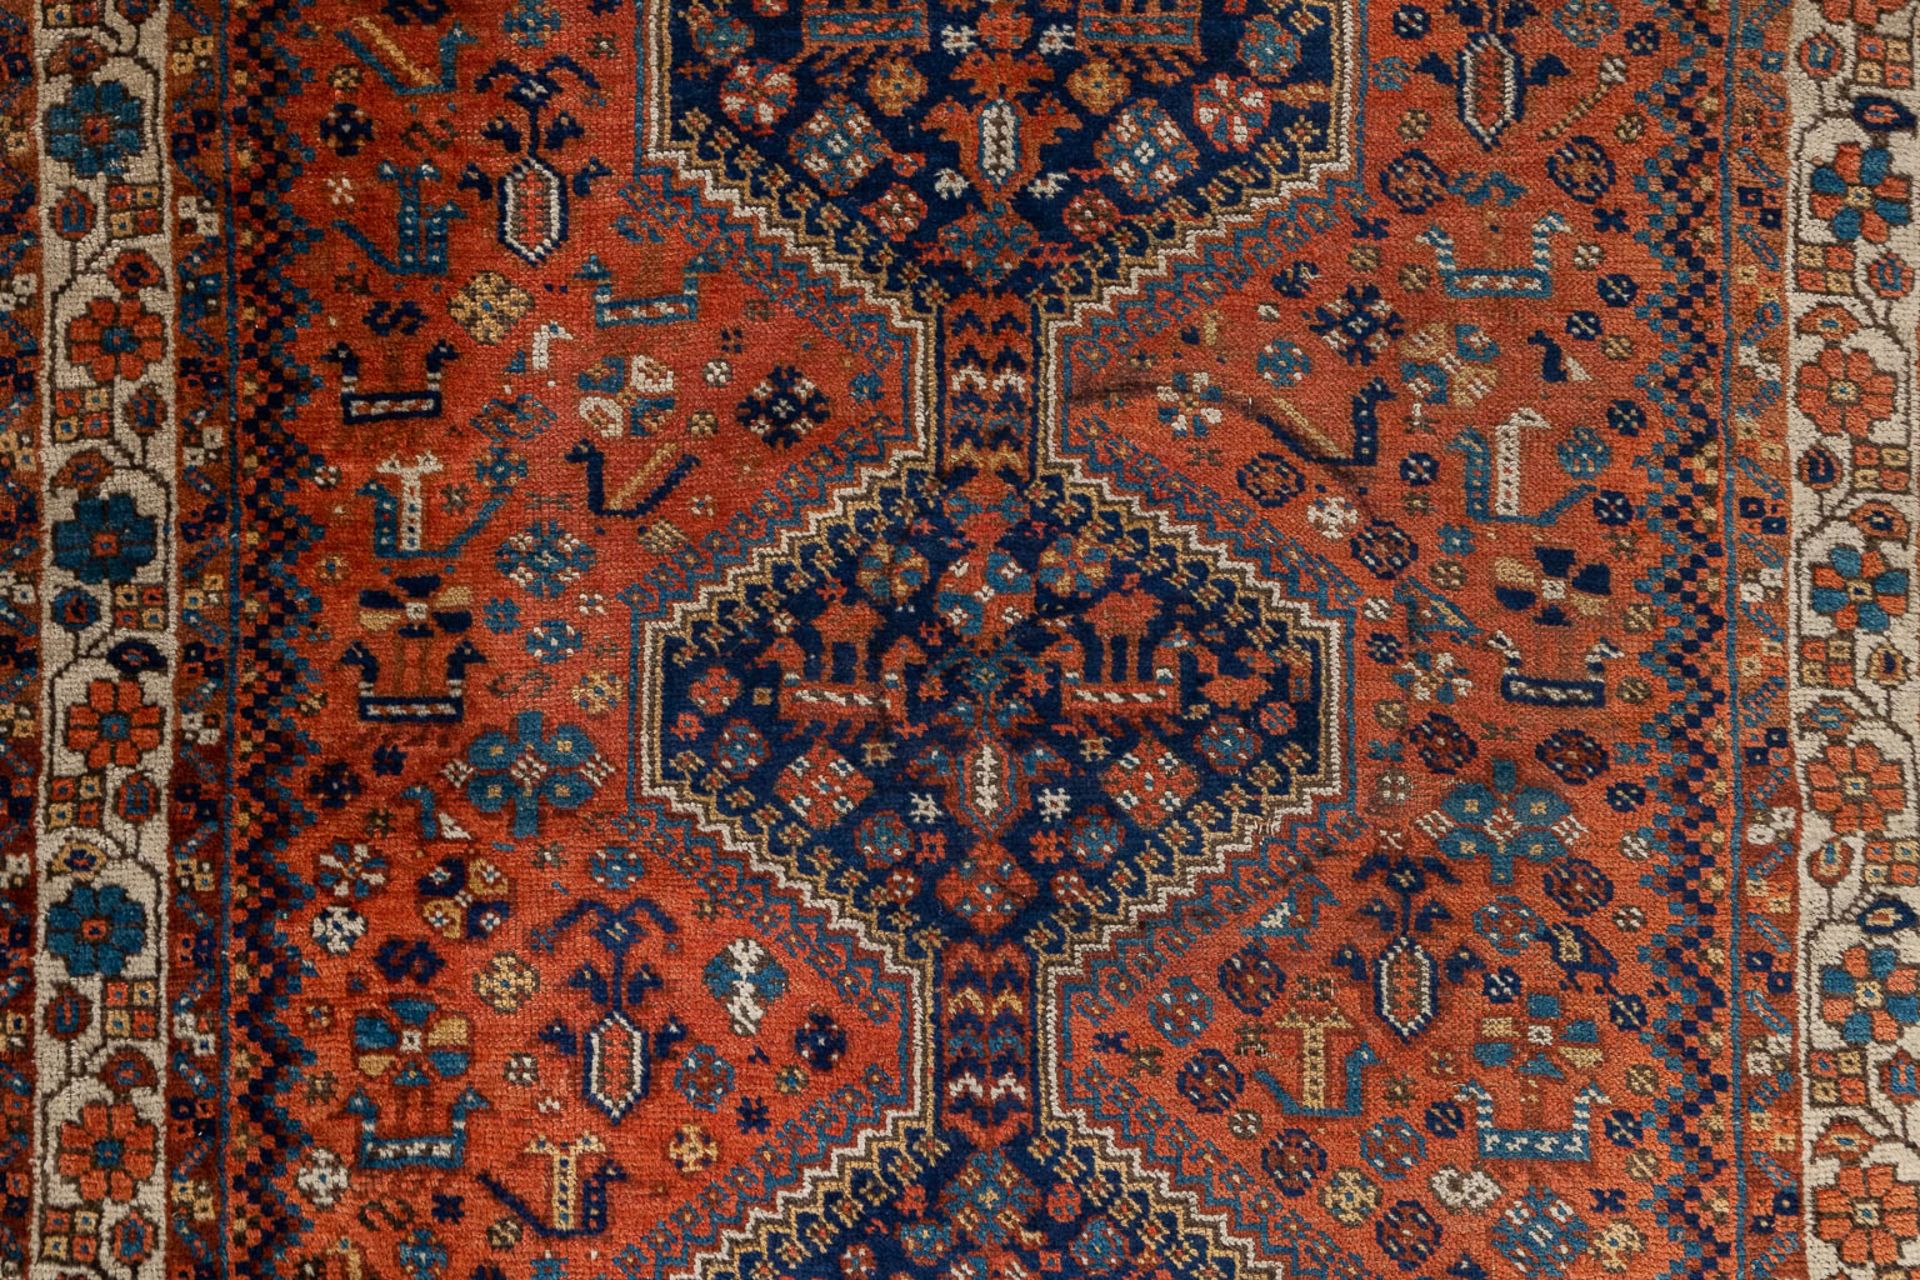 A collection of 3 Oriental hand-made carpets, probably Caucasian. (L: 157 x W: 116 cm) - Image 3 of 11